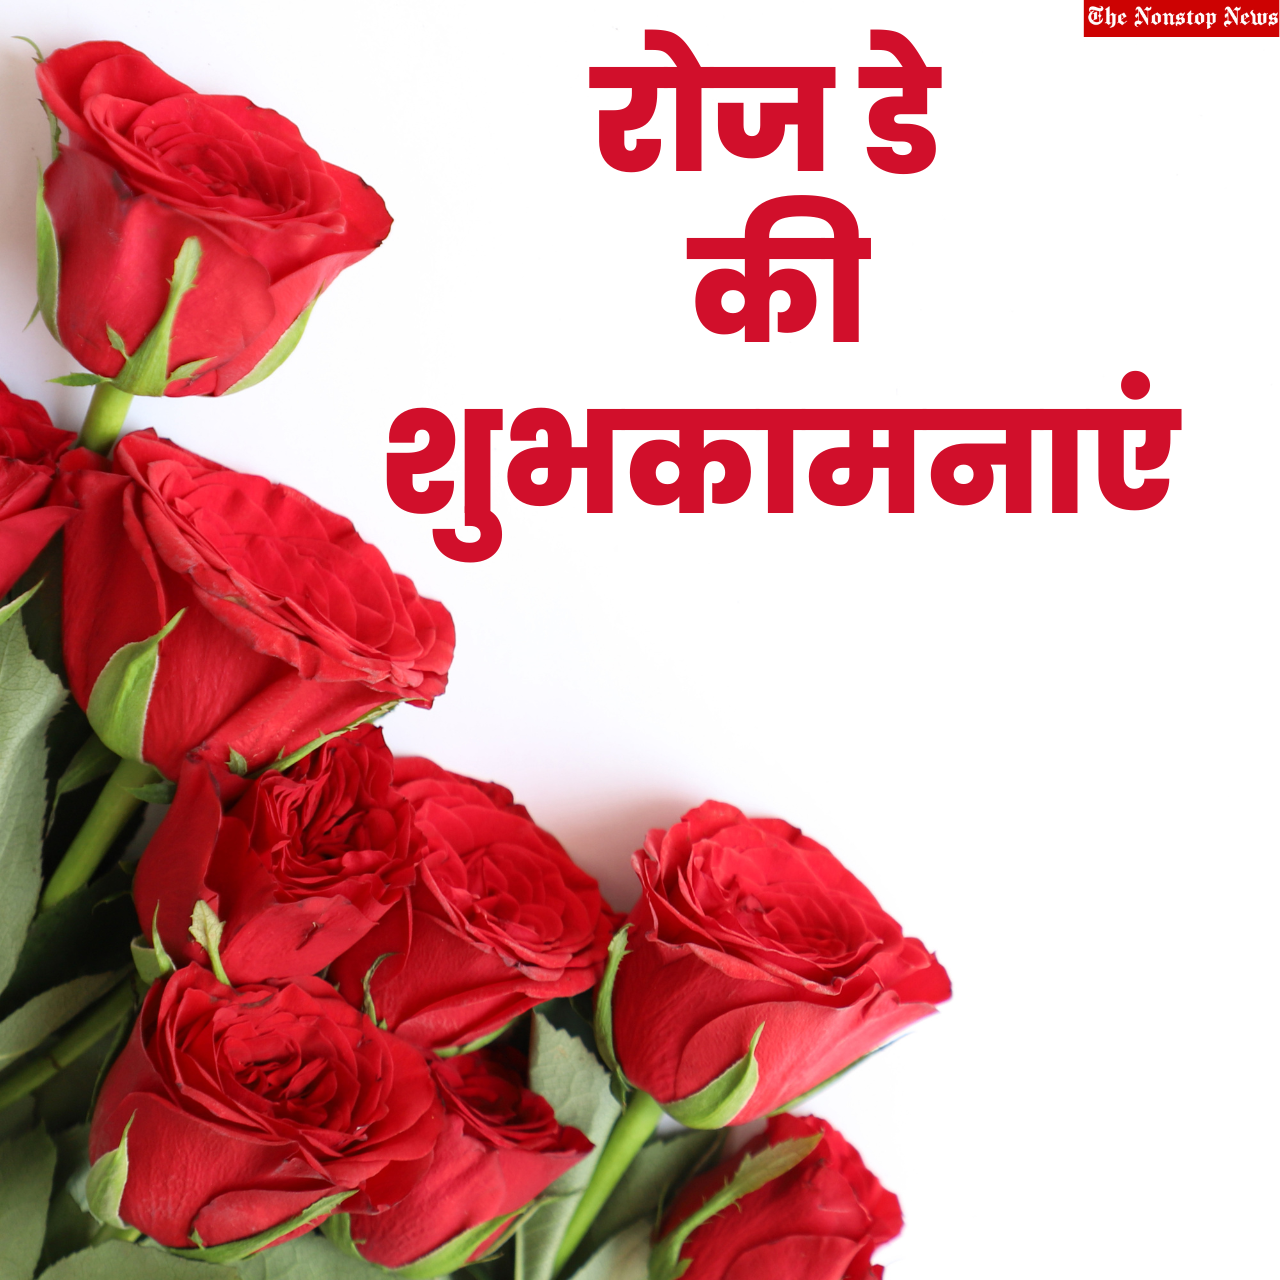 Top Rose Day 2023 Hindi Greetings, Shayari, Quotes, Images, Messages, Wishes, Banners, Sayings, Posters, Captions for Boyfriend/Girlfriend